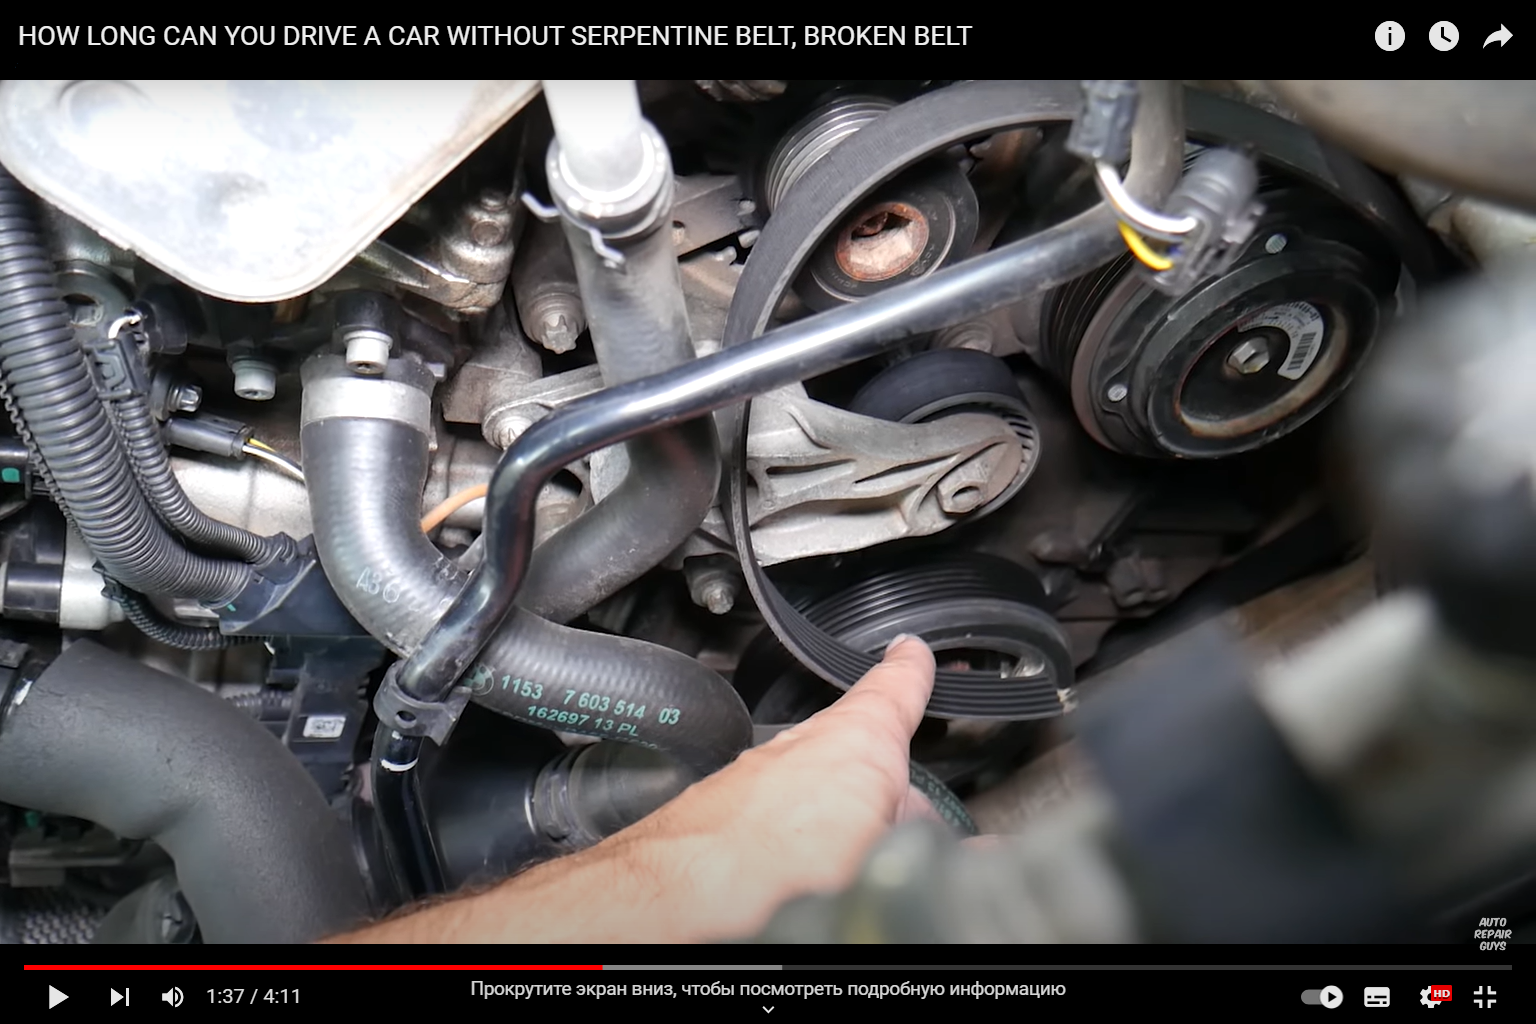 Can You Drive Without A Serpentine Belt?